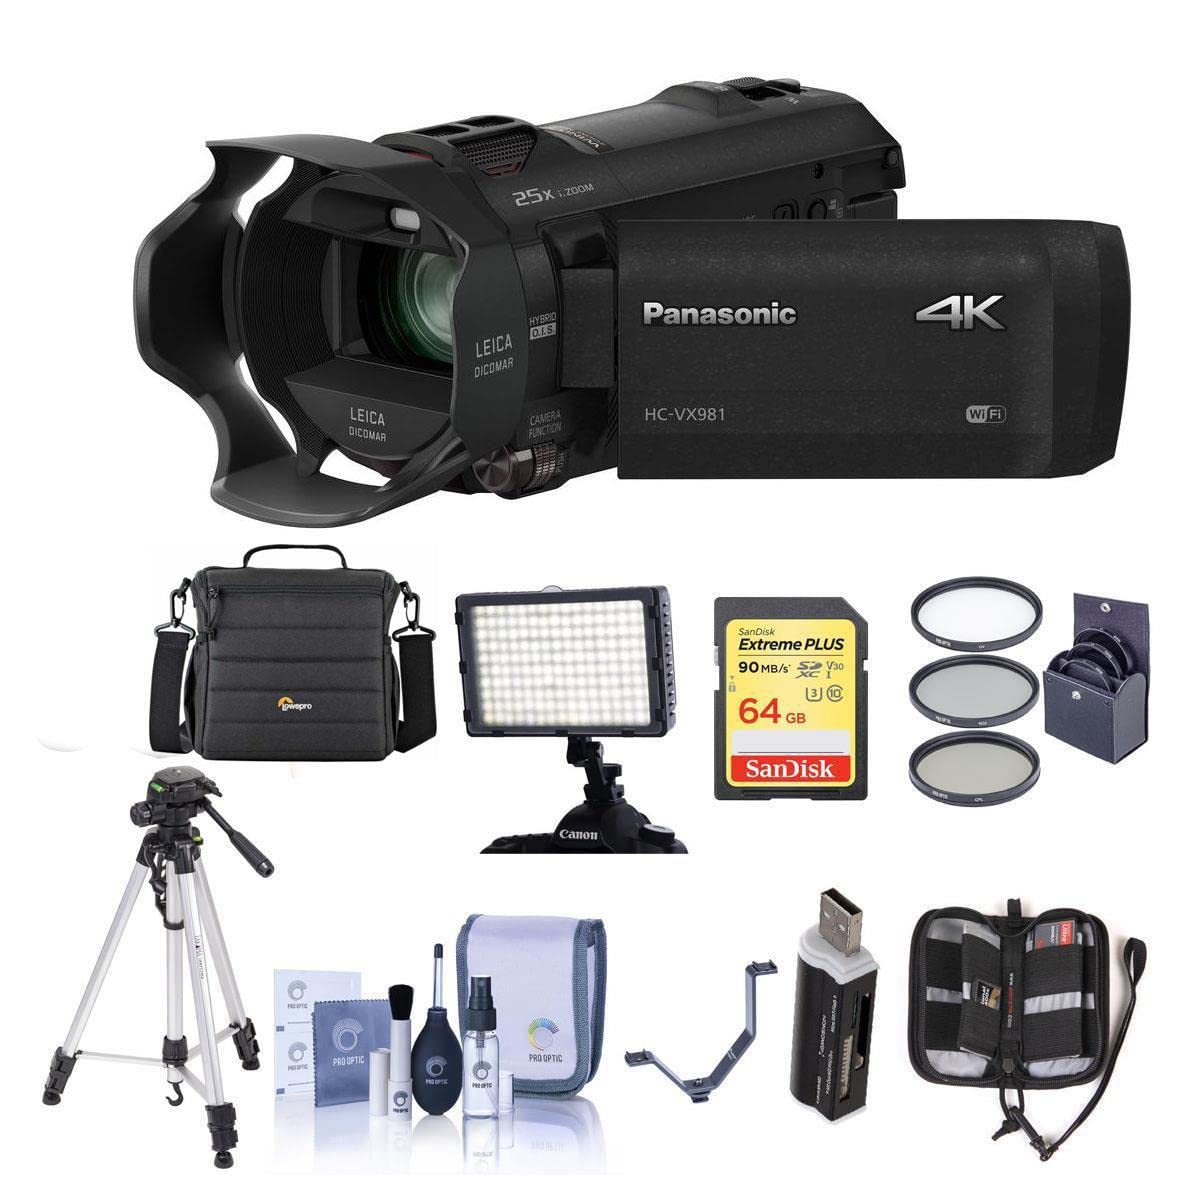 Panasonic 4K Ultra HD Camcorder HC-VX981K (Black), 20x Optical Zoom, Bundle with Video Bag, LED Light, 64GB SD Card, Tripod, Filter Kit, Cleaning Kit, Memory Wallet and Accessories